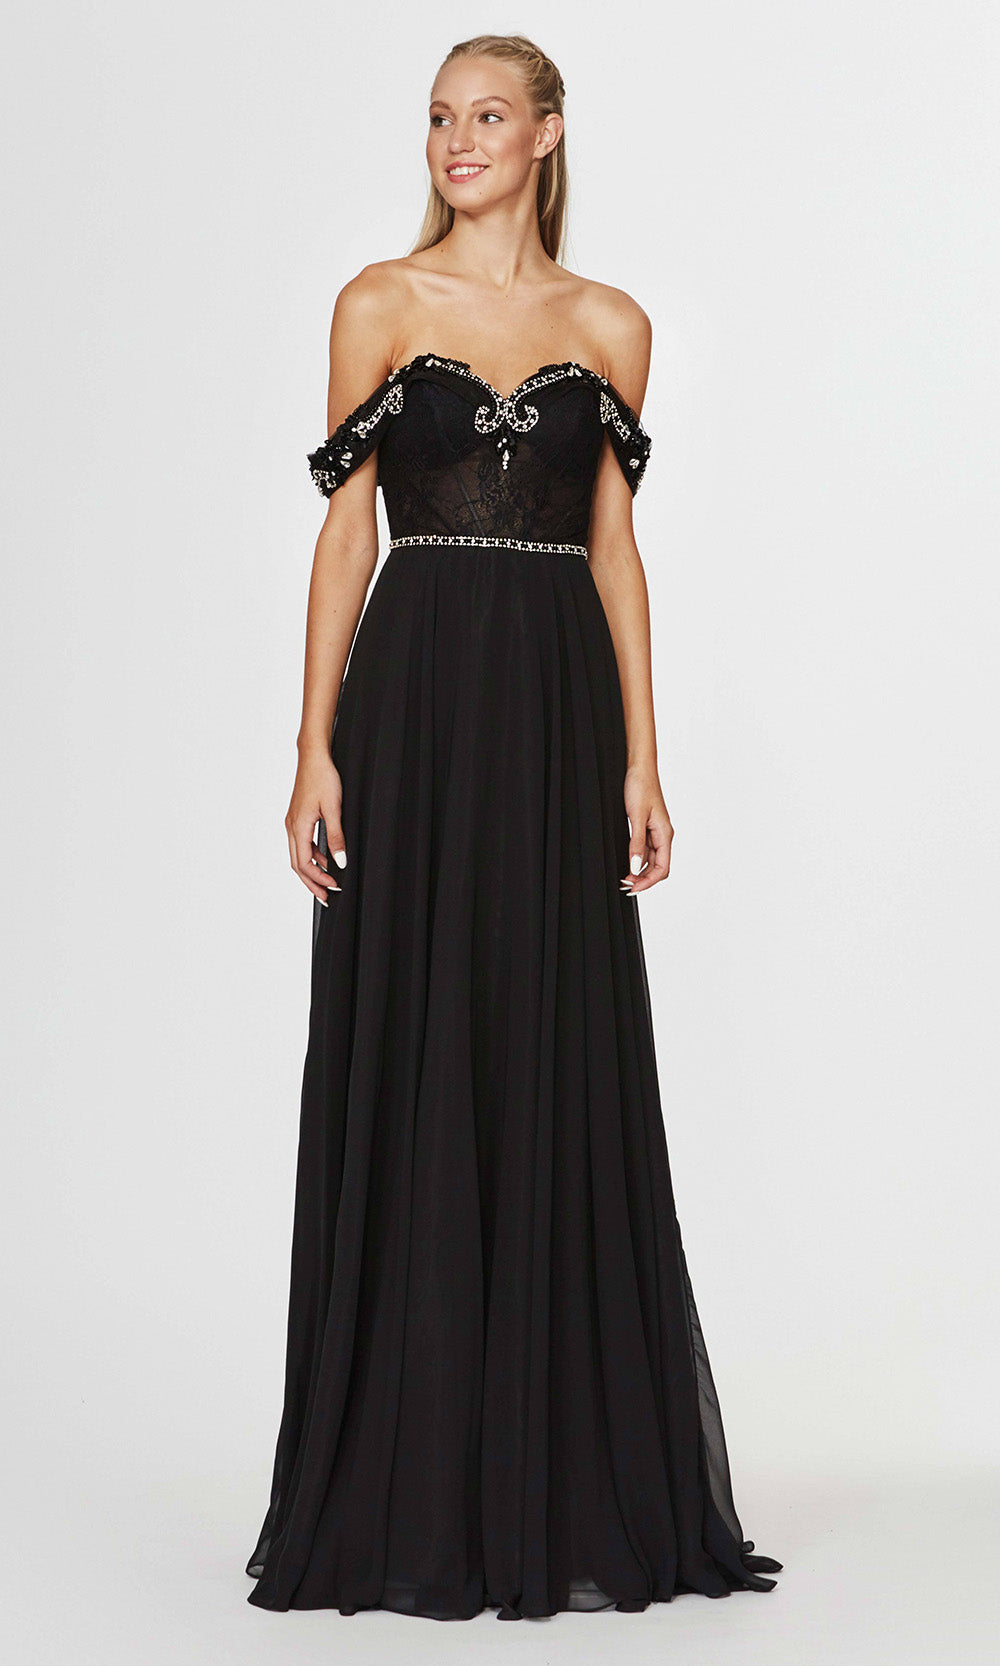 Angela & Alison - 91012 Draped Off Shoulder Beaded Lace Chiffon Gown - 1 pc Black In Size 14 Available CCSALE 14 / Black